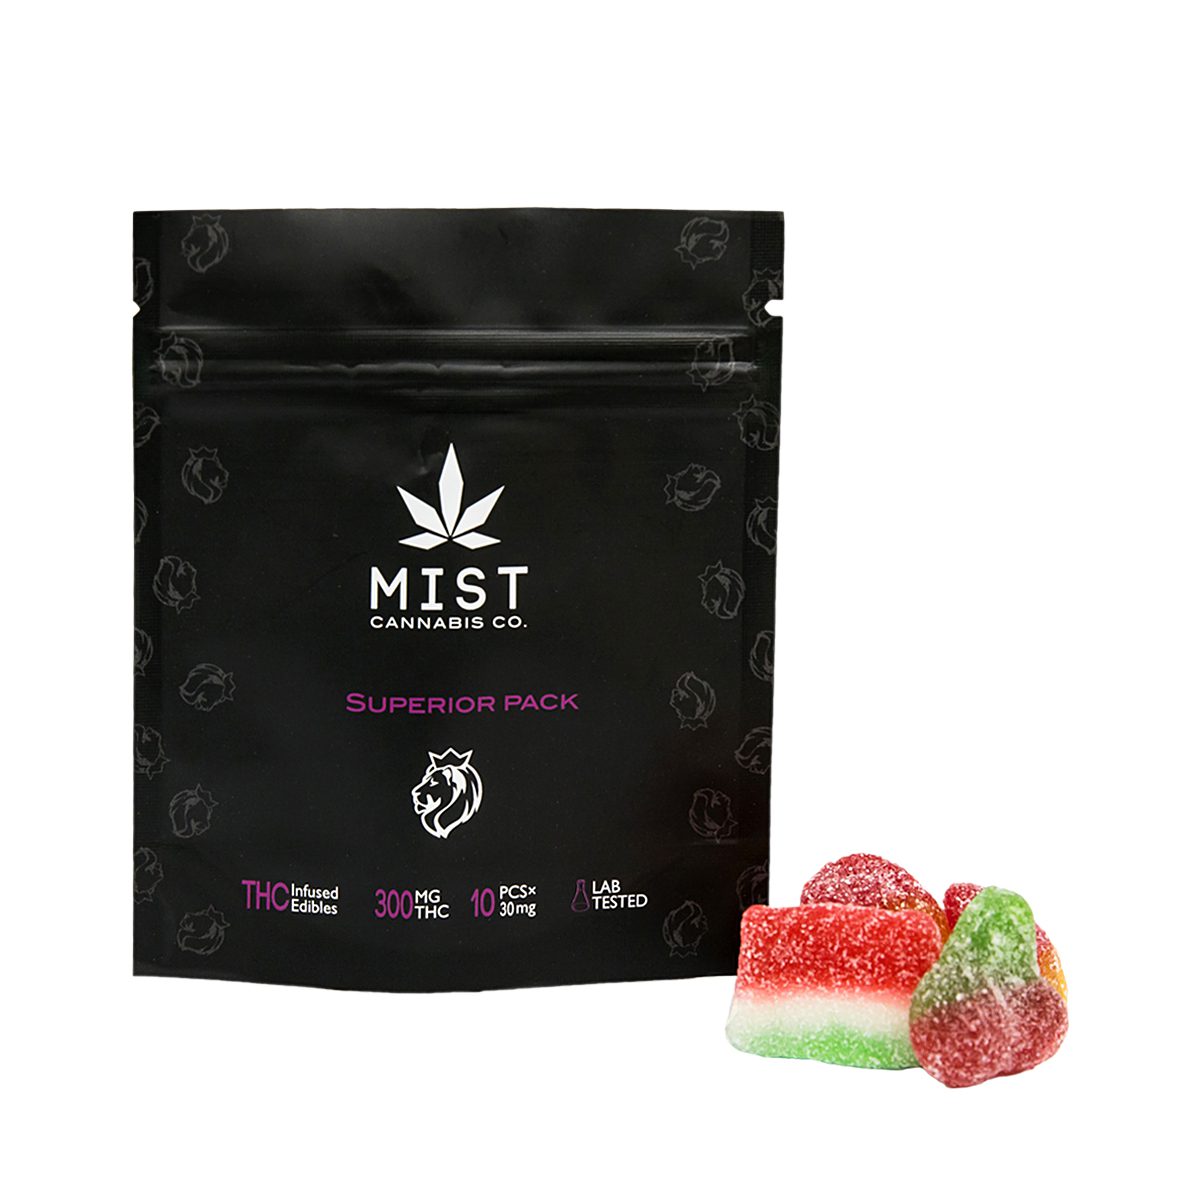 Superior-Pack-300MG-THC-Gummy-By-Mist-Cannabis-Co